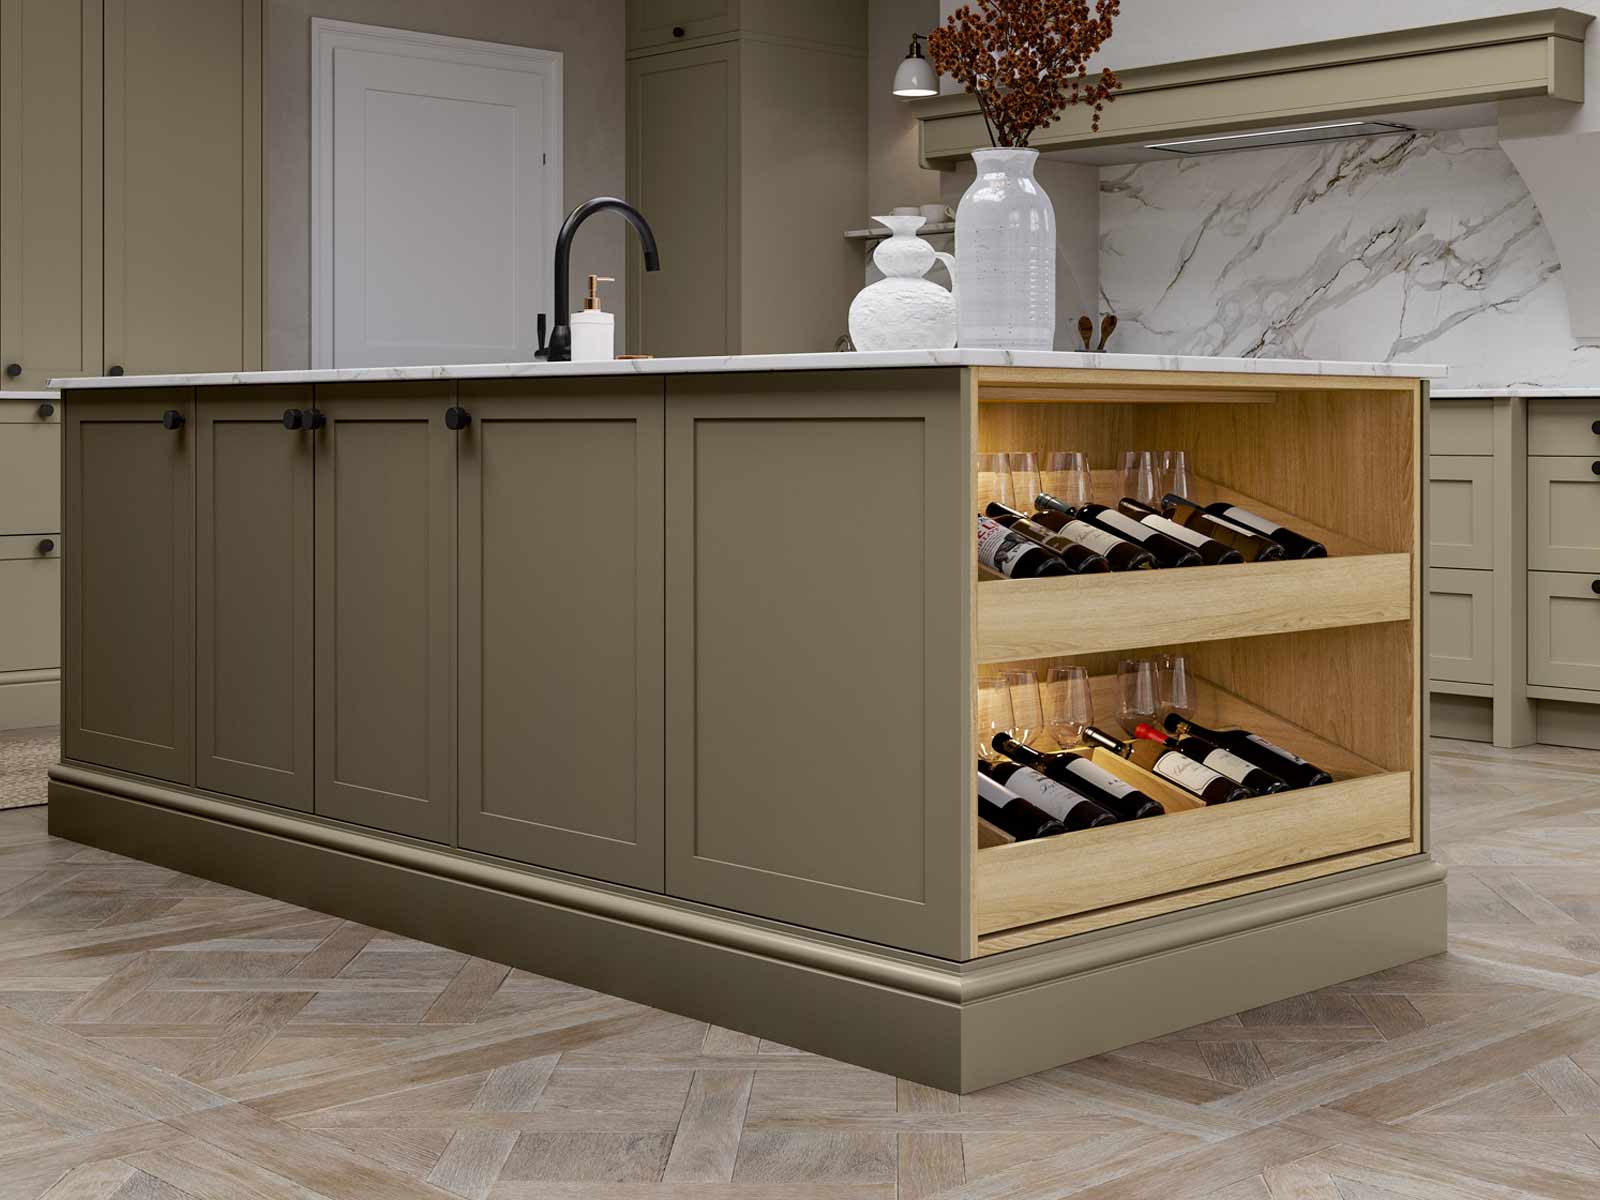 A cottage kitchen island with a wine drawer